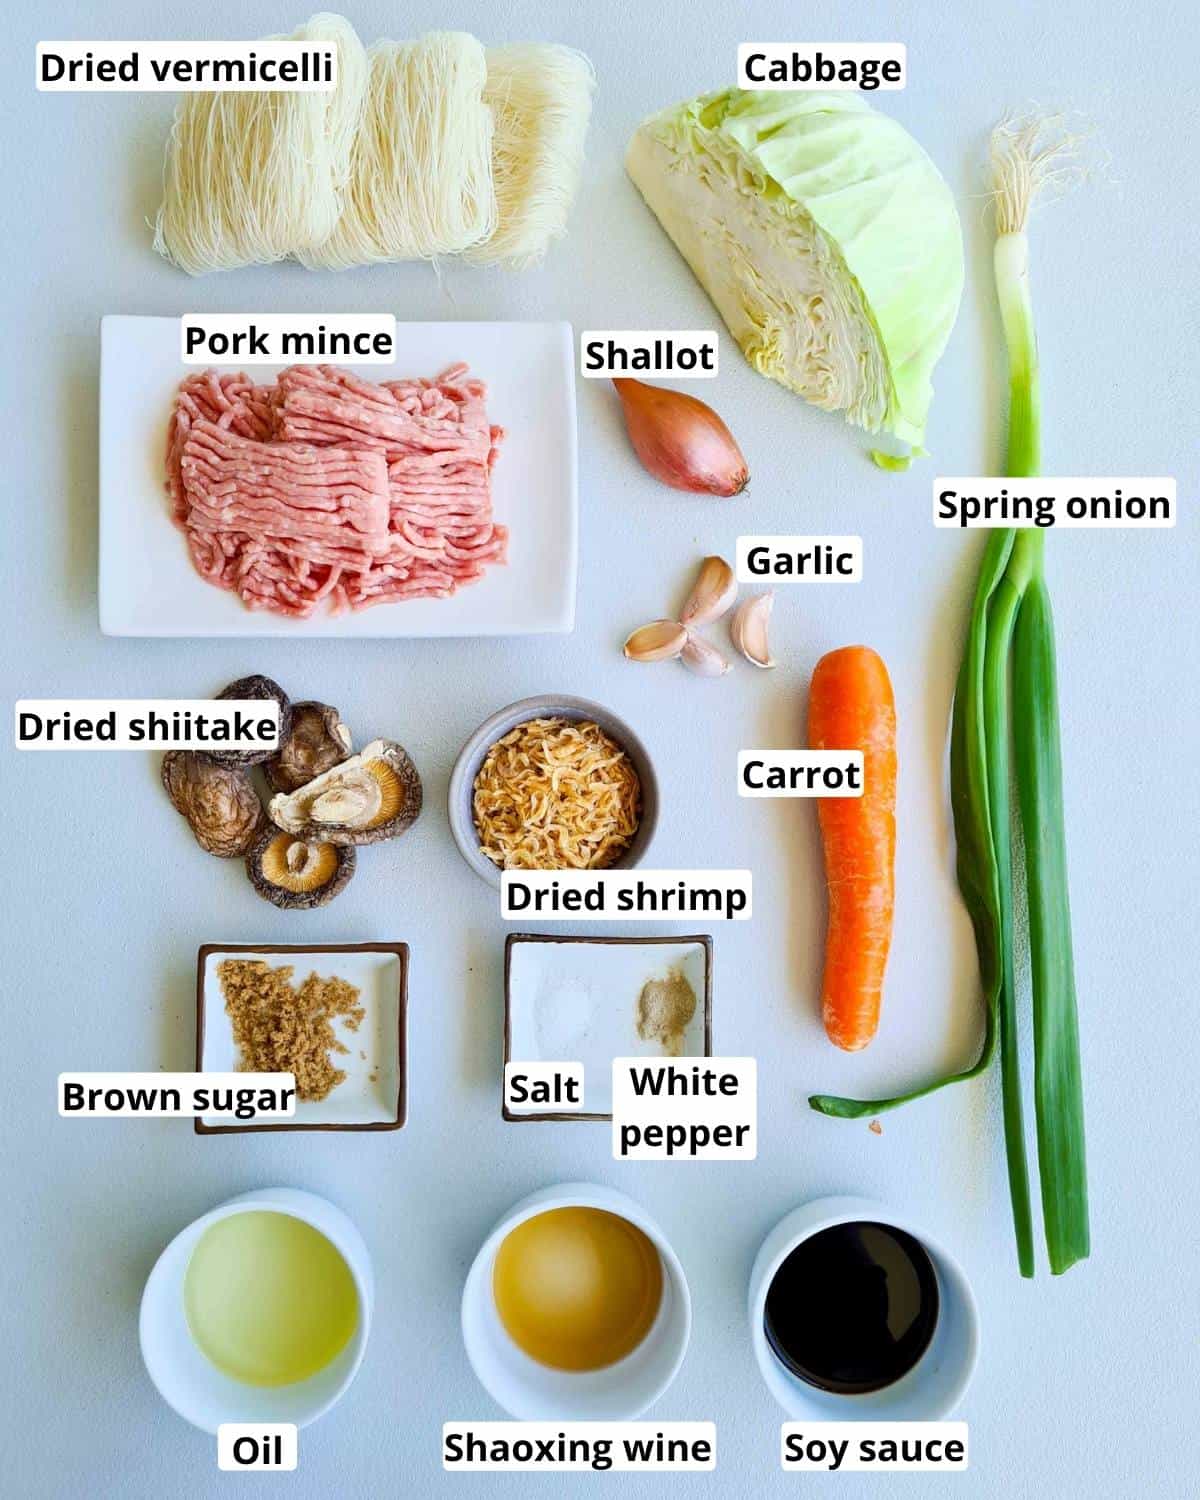 All the ingredients required to make this recipe, labeled.